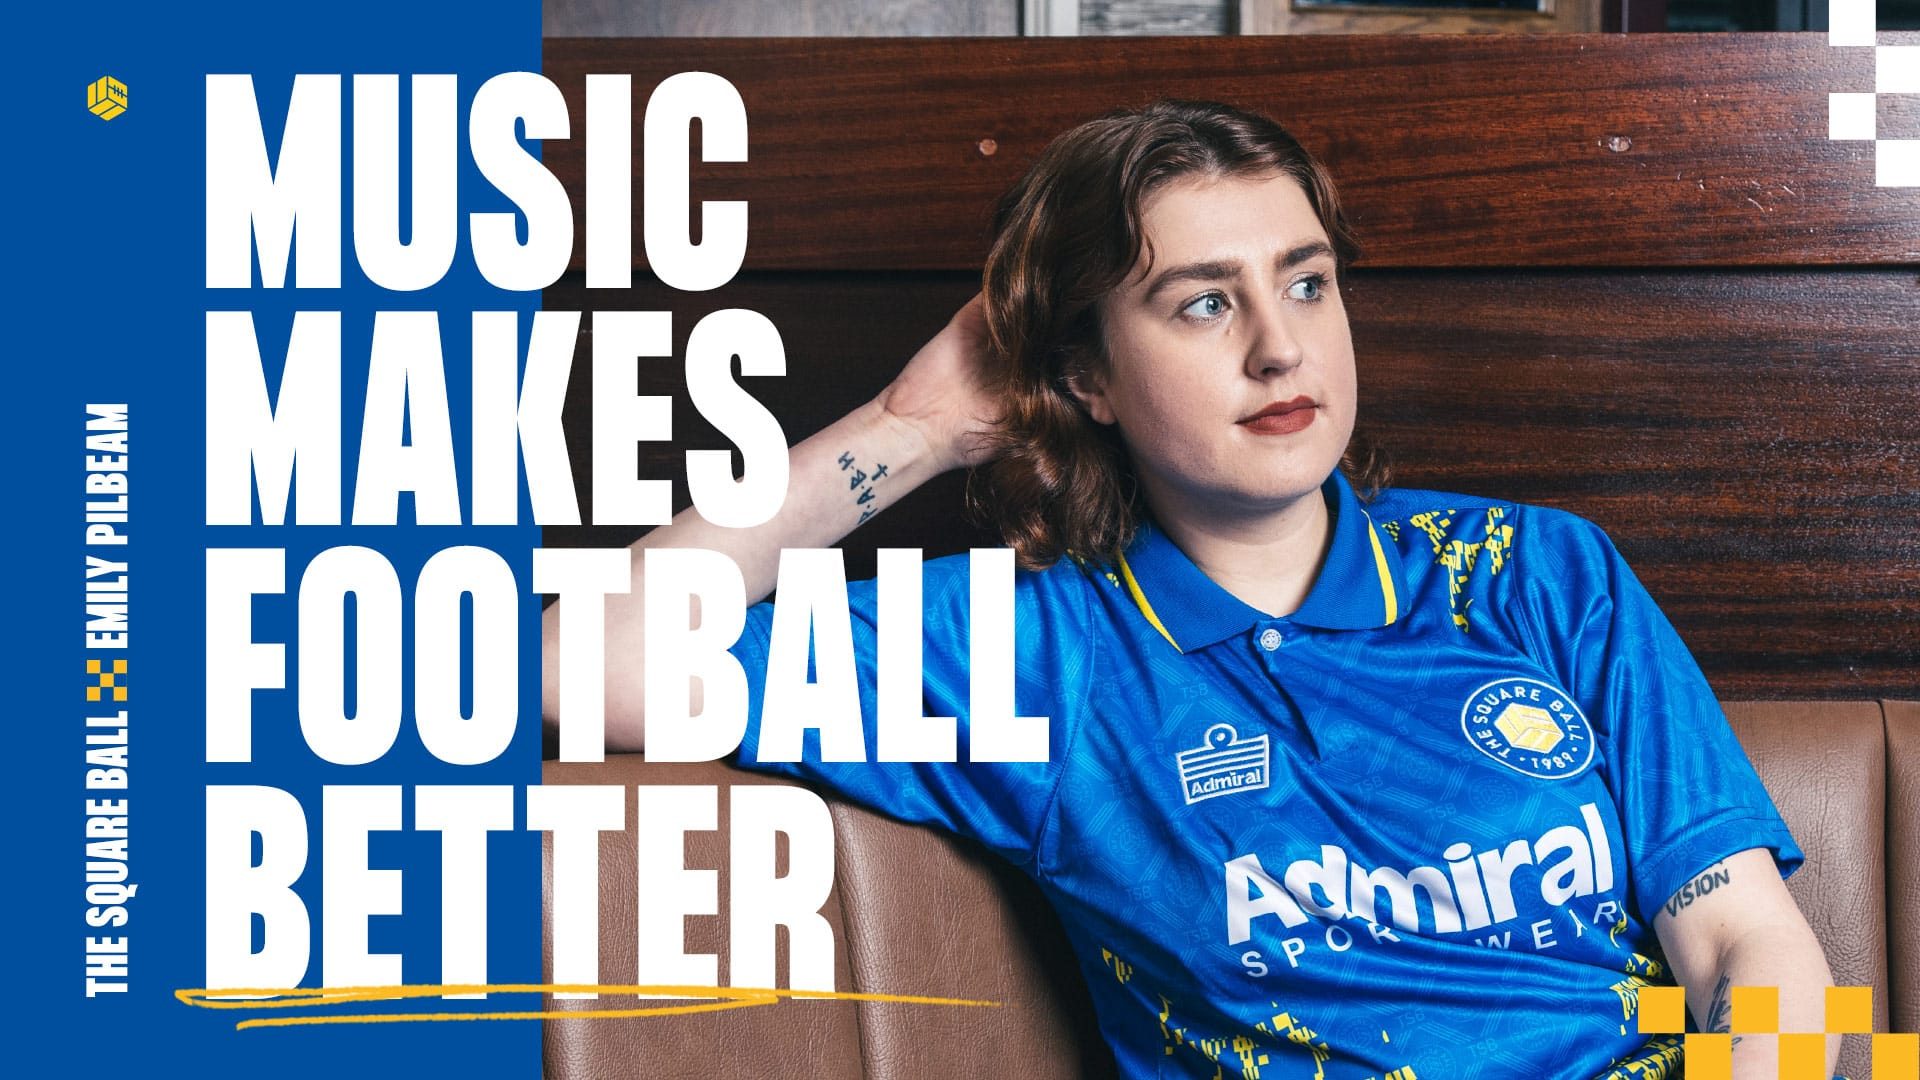 MUSIC MAKES FOOTBALL BETTER is the text, next to a photo of DJ Emily Pilbeam wearing a blue TSB Admiral shirt